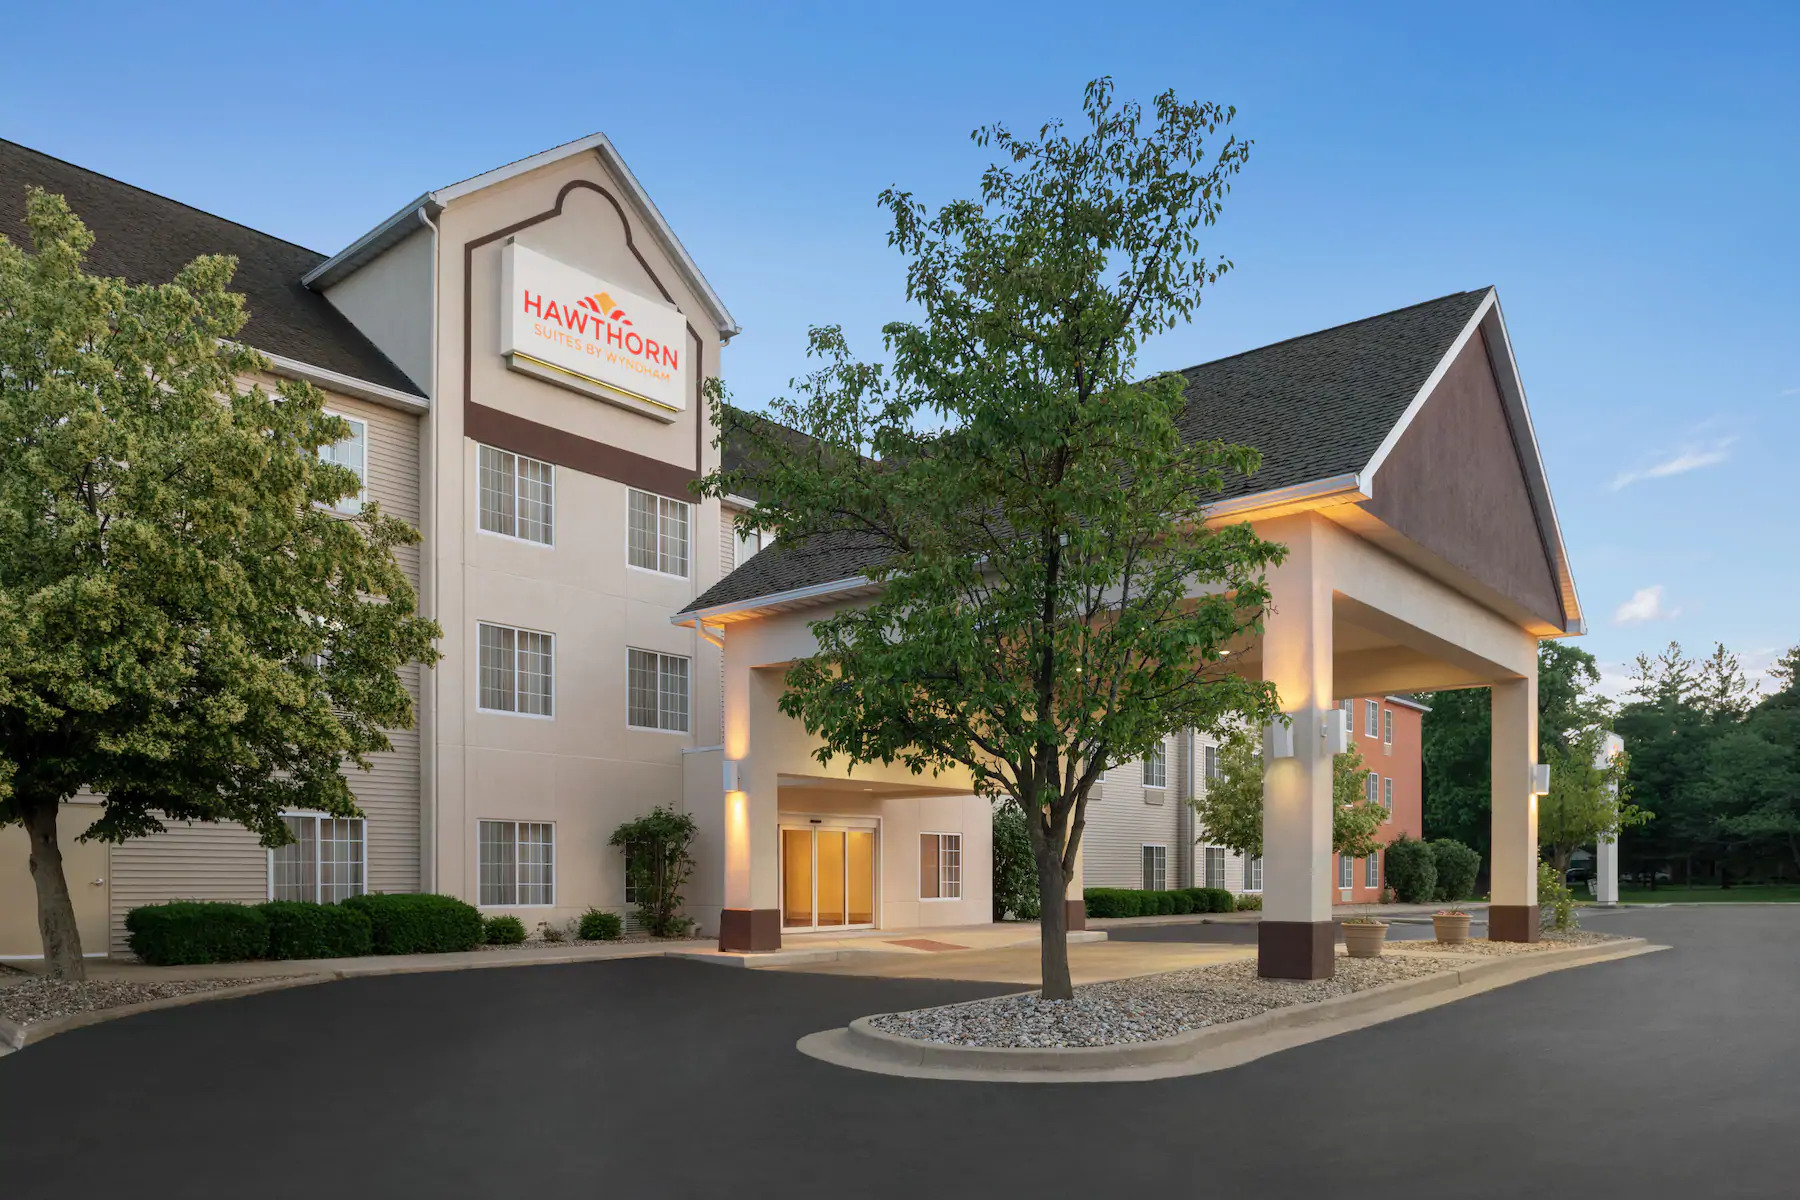 https://www.wyndhamhotels.com/hawthorn-extended-stay/decatur-illinois/hawthorn-suites-by-wyndham-decatur/overview